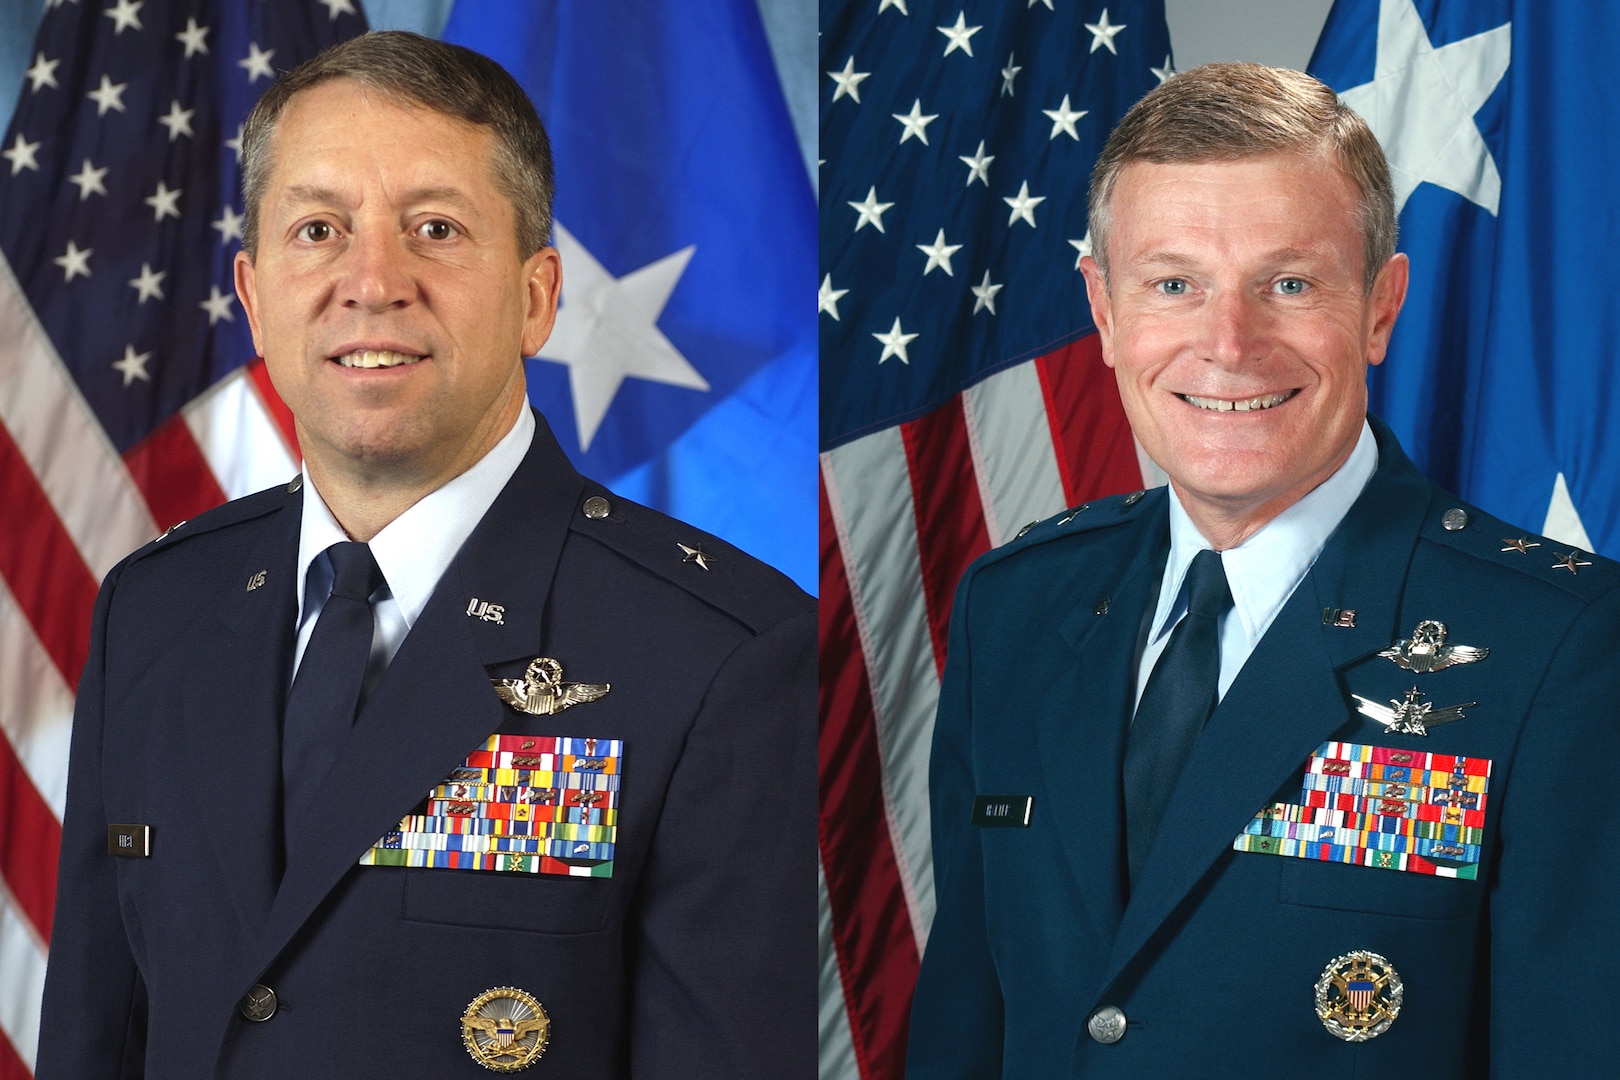 Brig. Gen. Gregory A Feest will take command of 19th Air Force from Maj. Gen. Irving L. Halter Jr. at a ceremony July 30 at Randolph Air Force Base, Texas.